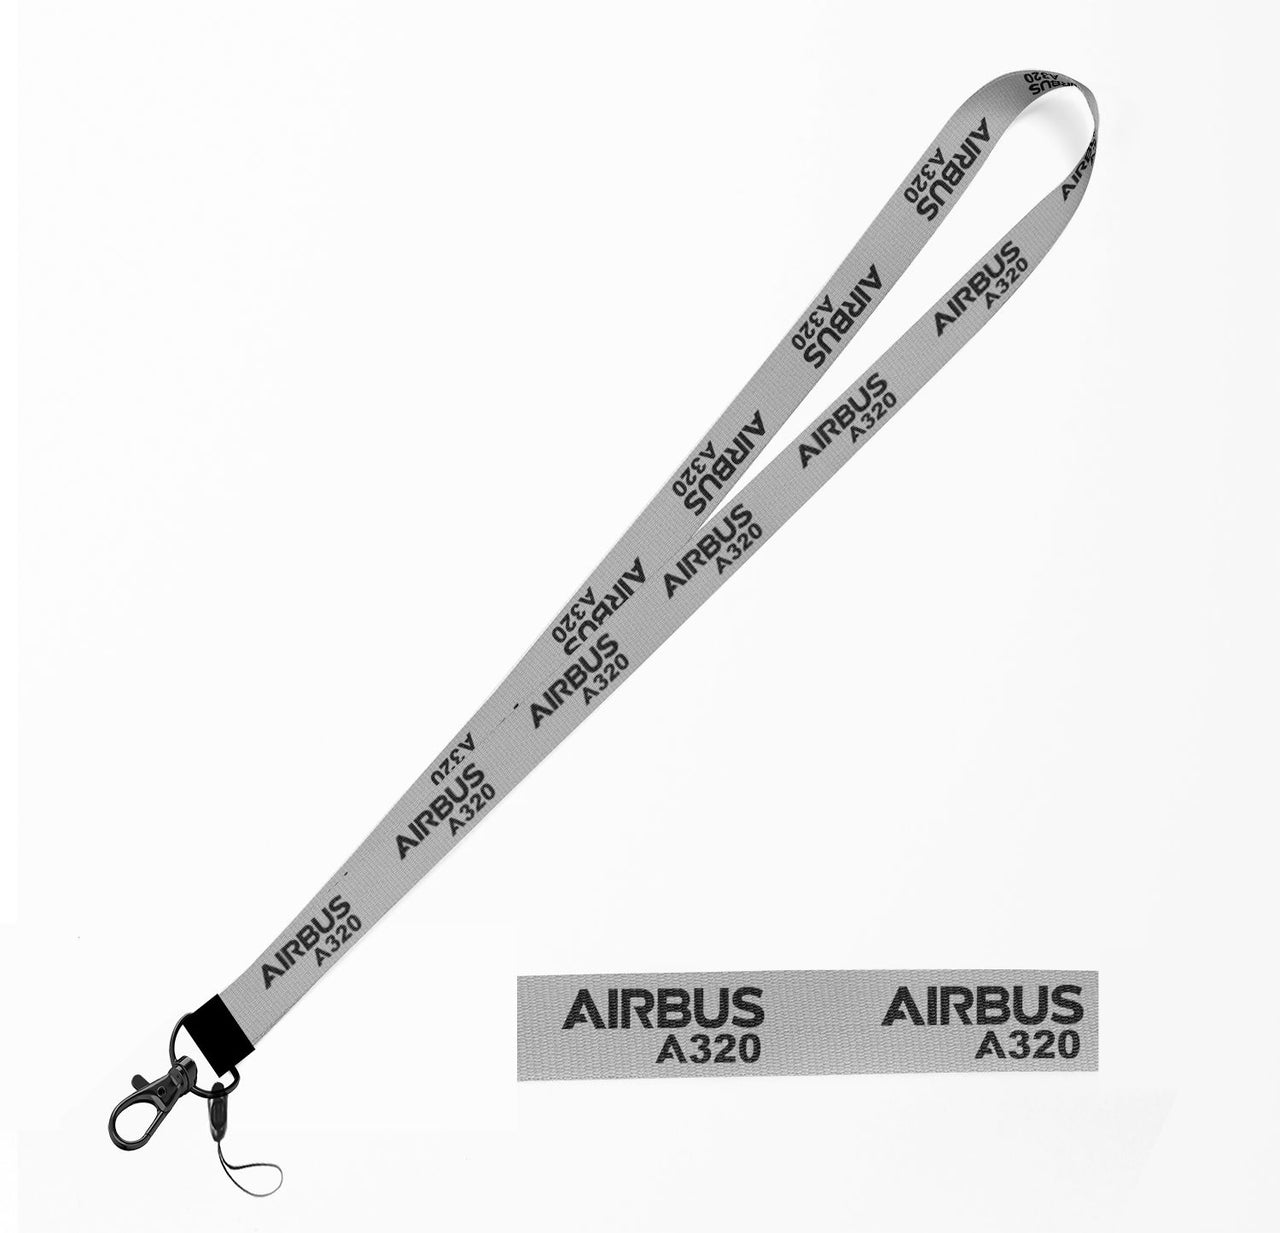 Airbus A320 & Text Designed Lanyard & ID Holders